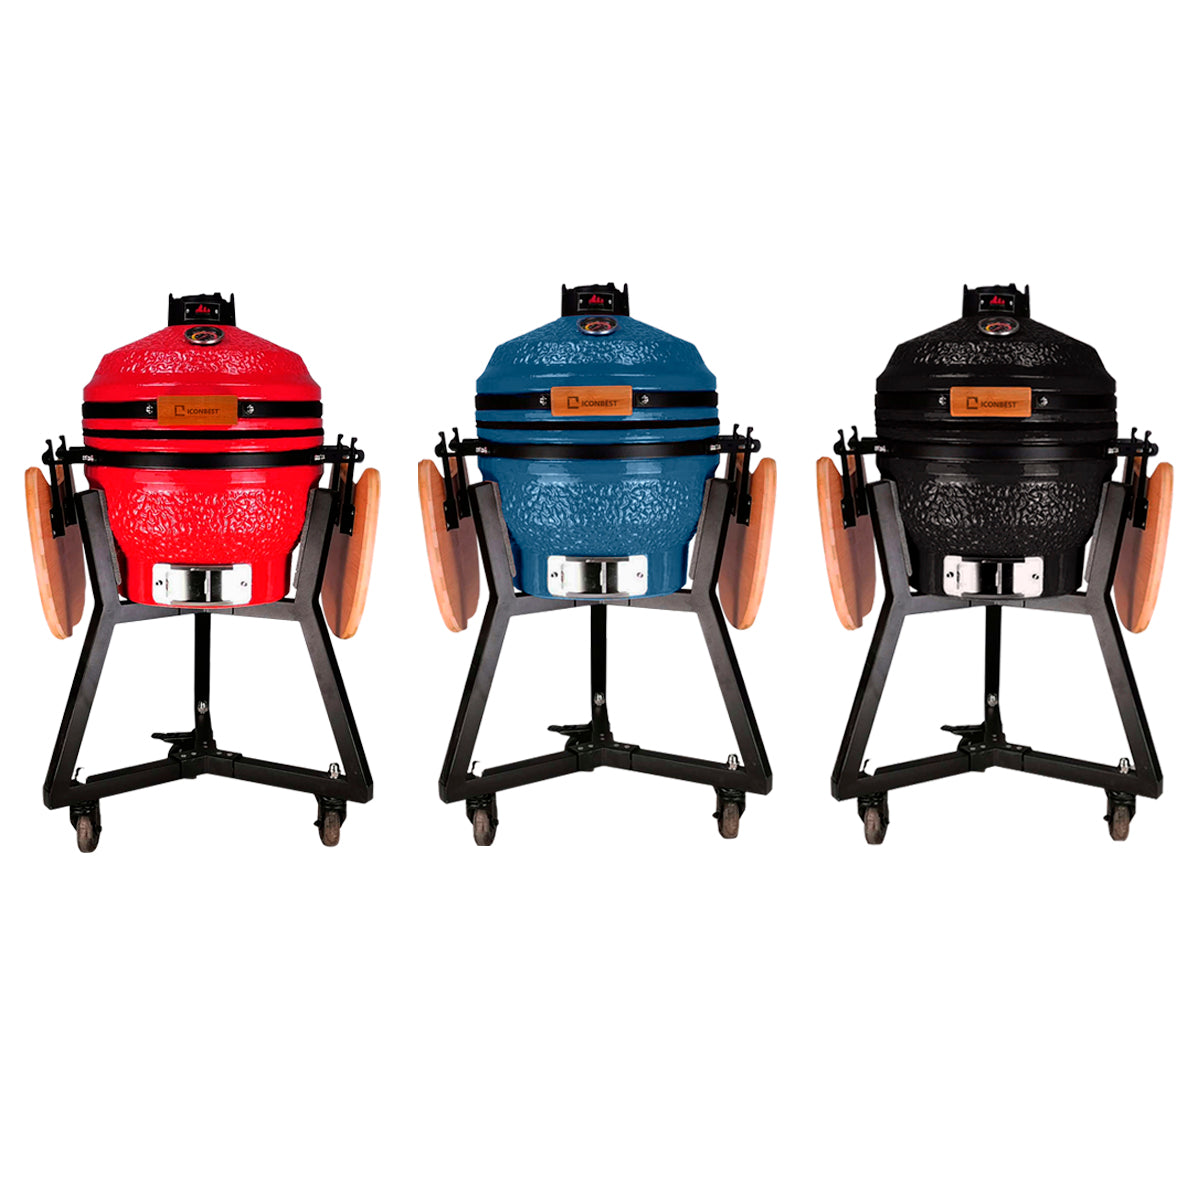 Kamado Charcoal Grills With Extra Bonus of Accessories